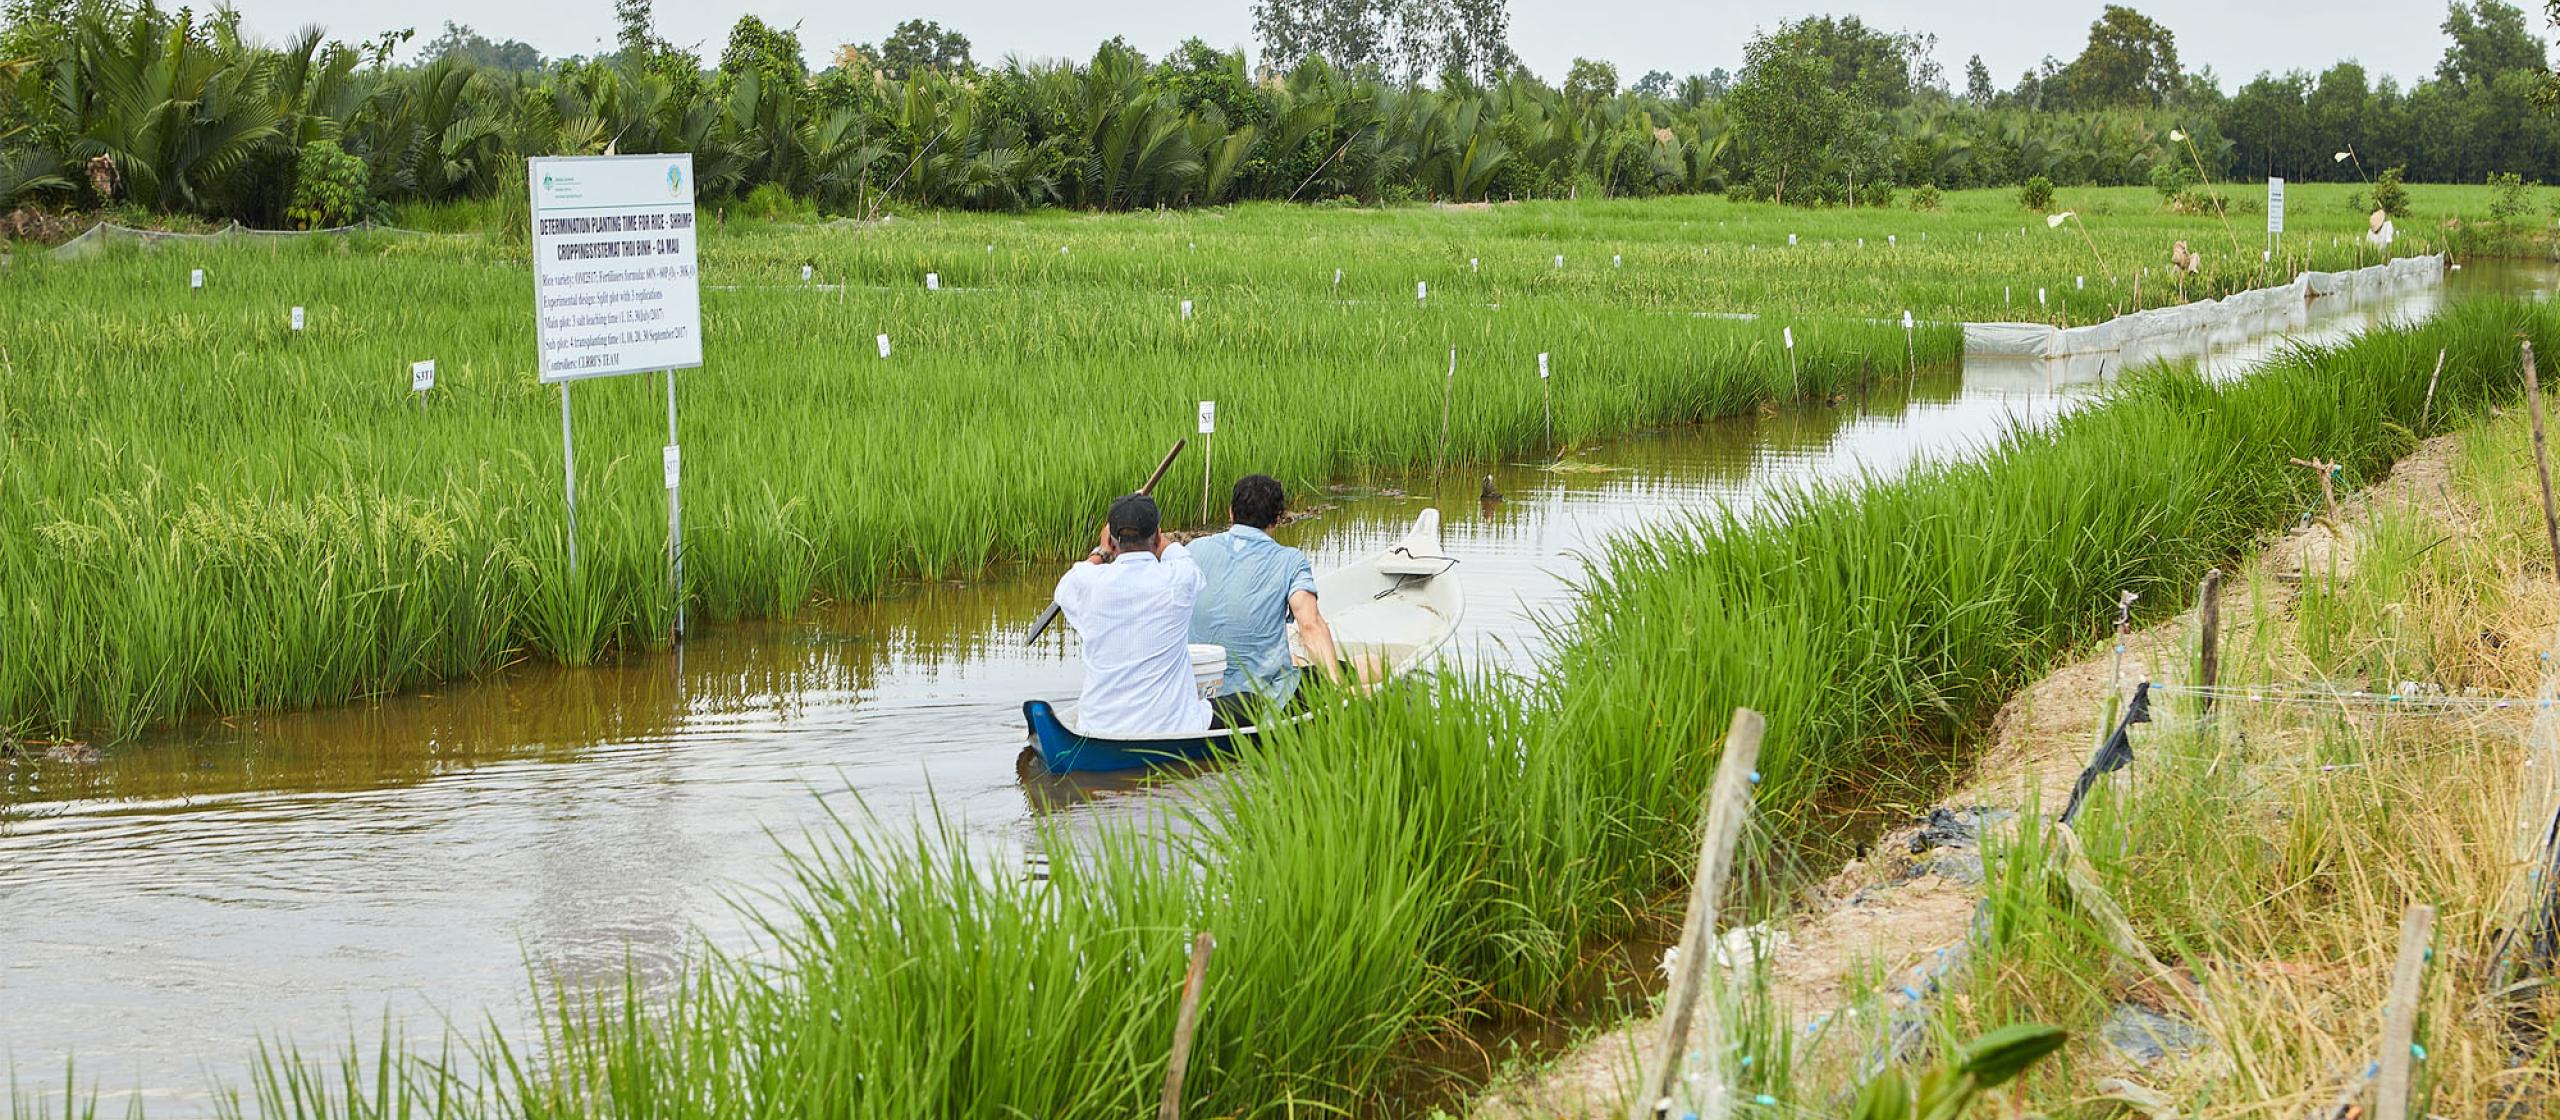 Two farmers row through the rice fields.